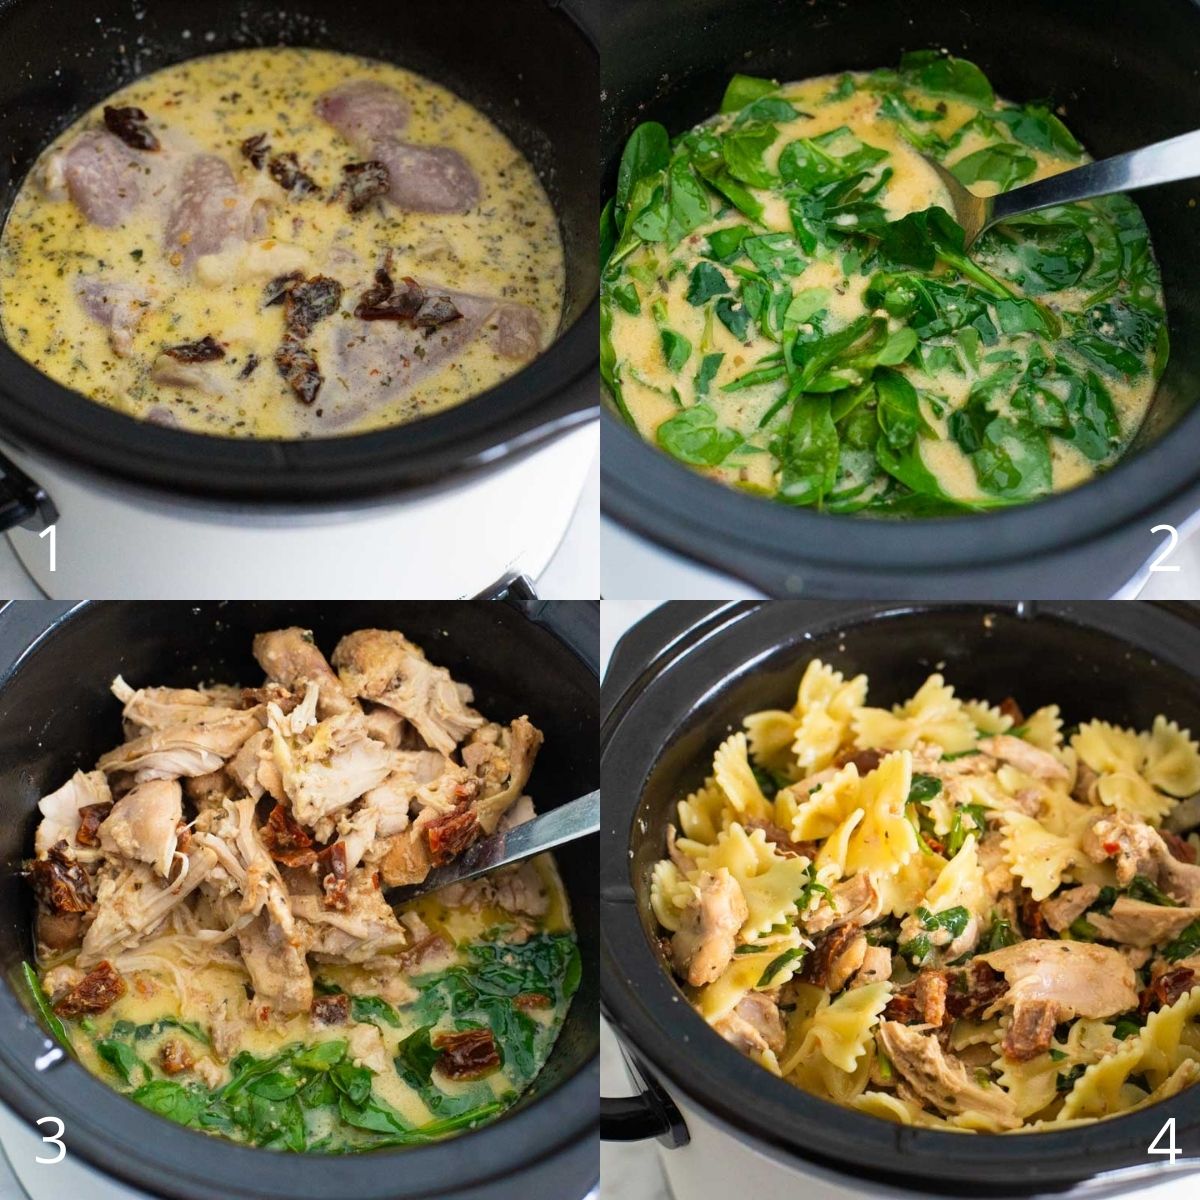 Step by step photos show how to cook the chicken, add spinach, and combine with pasta.